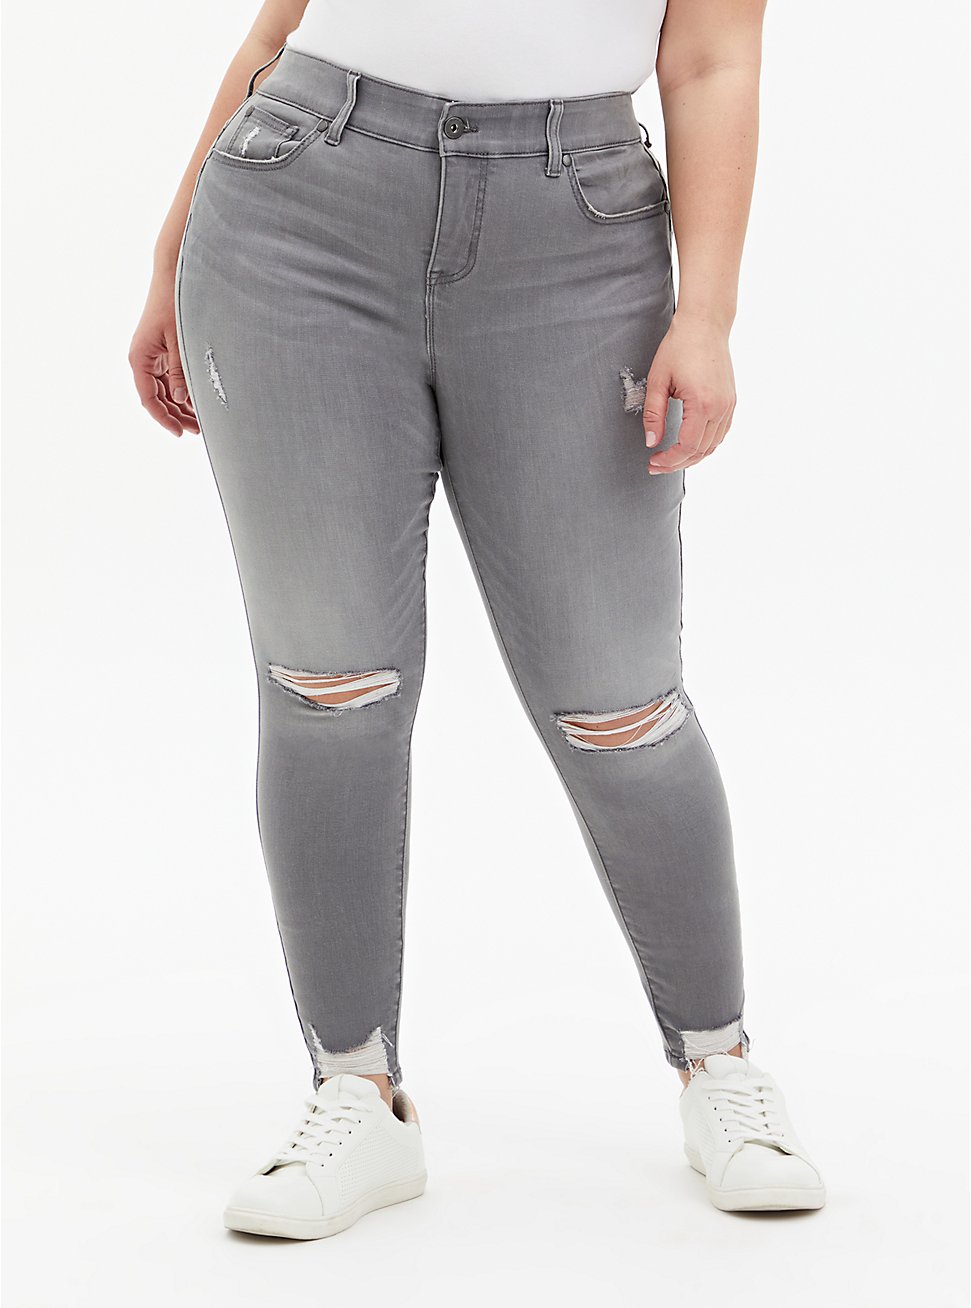 Plus Size Bombshell Skinny Jean - Super Soft Grey with Destructured Hem, SMOKE AND MIRRORS, hi-res